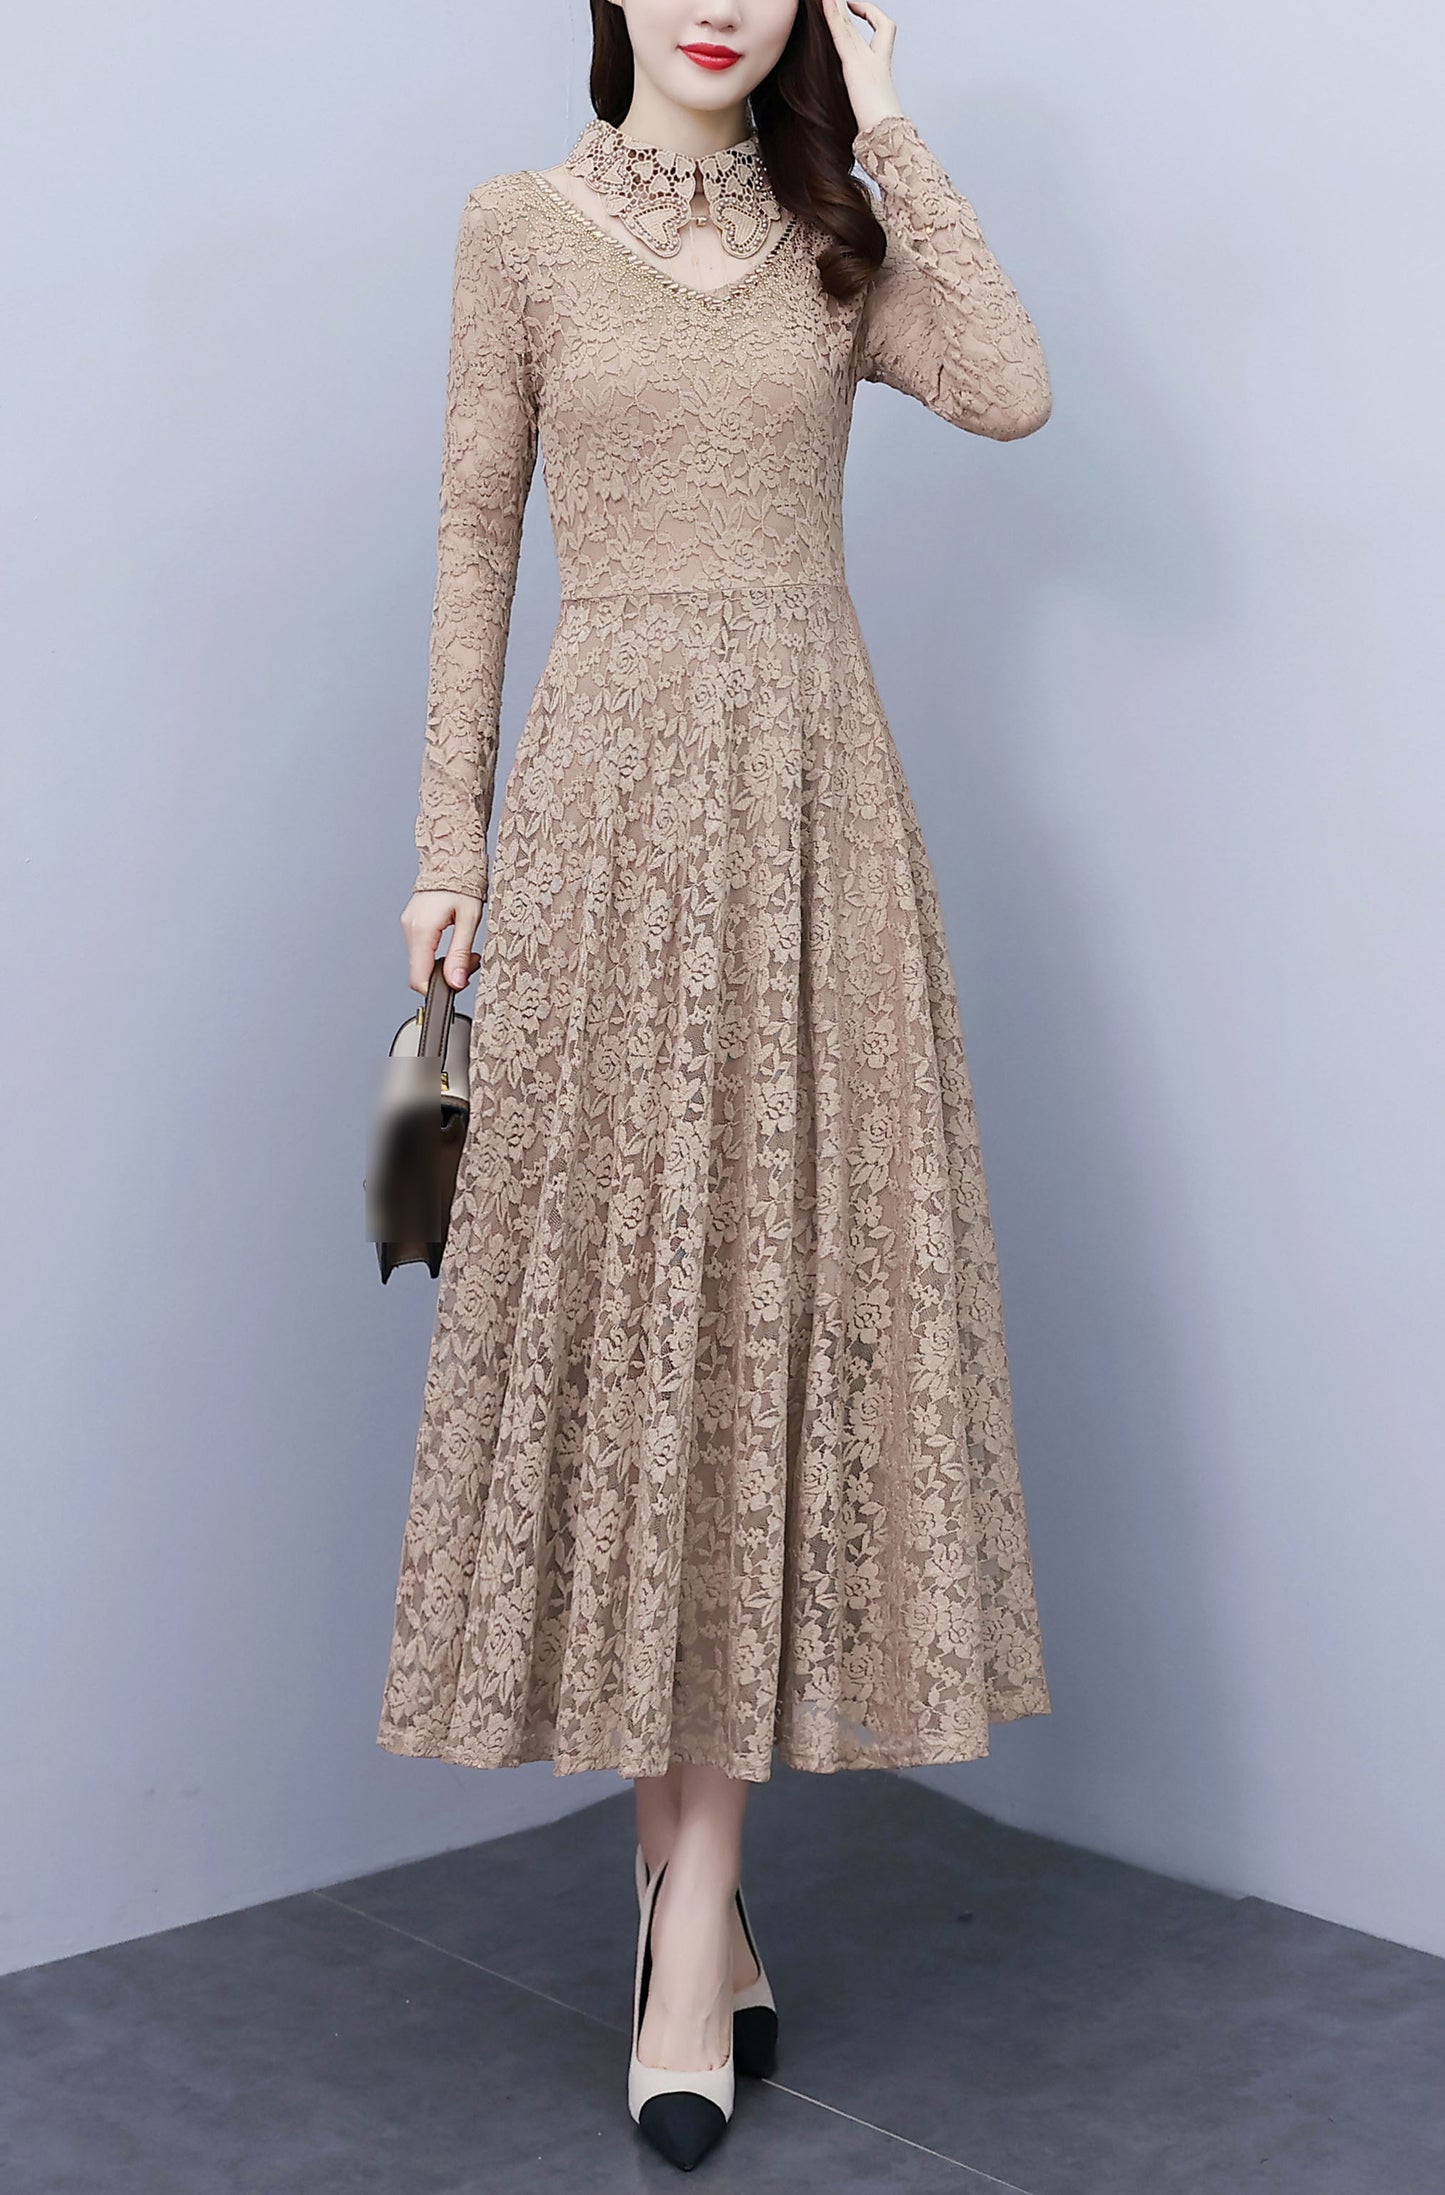 Collared Neck Long Sleeve Floral Lace Dress